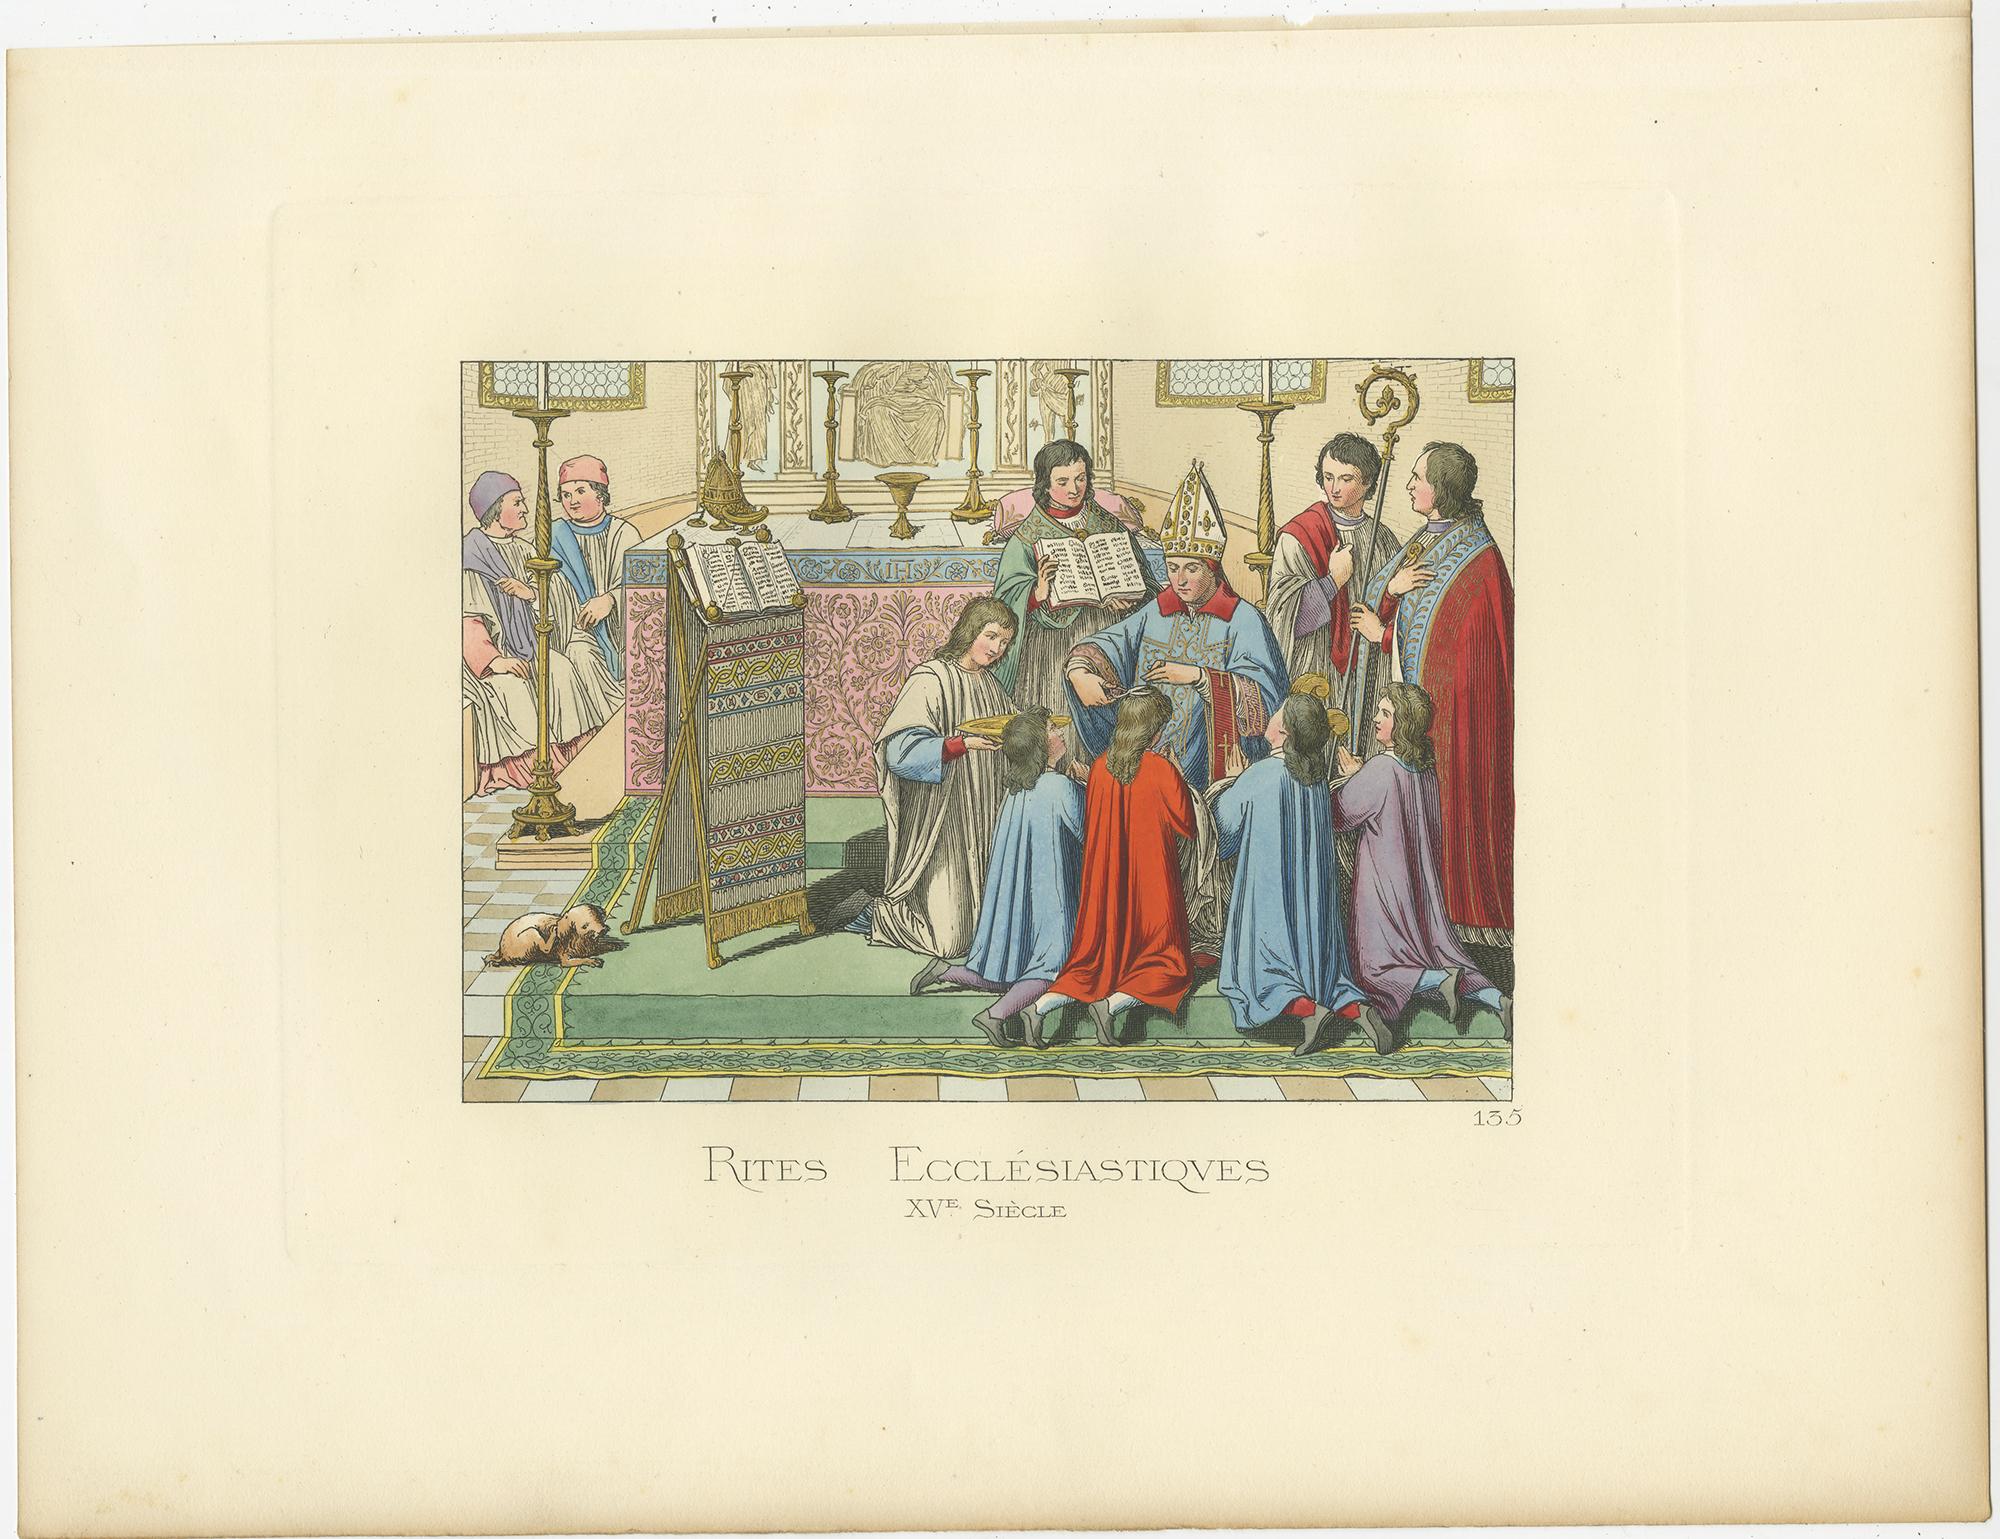 19th Century Antique Print of Ecclesiastical Rites, 15th Century, by Bonnard, 1860 For Sale